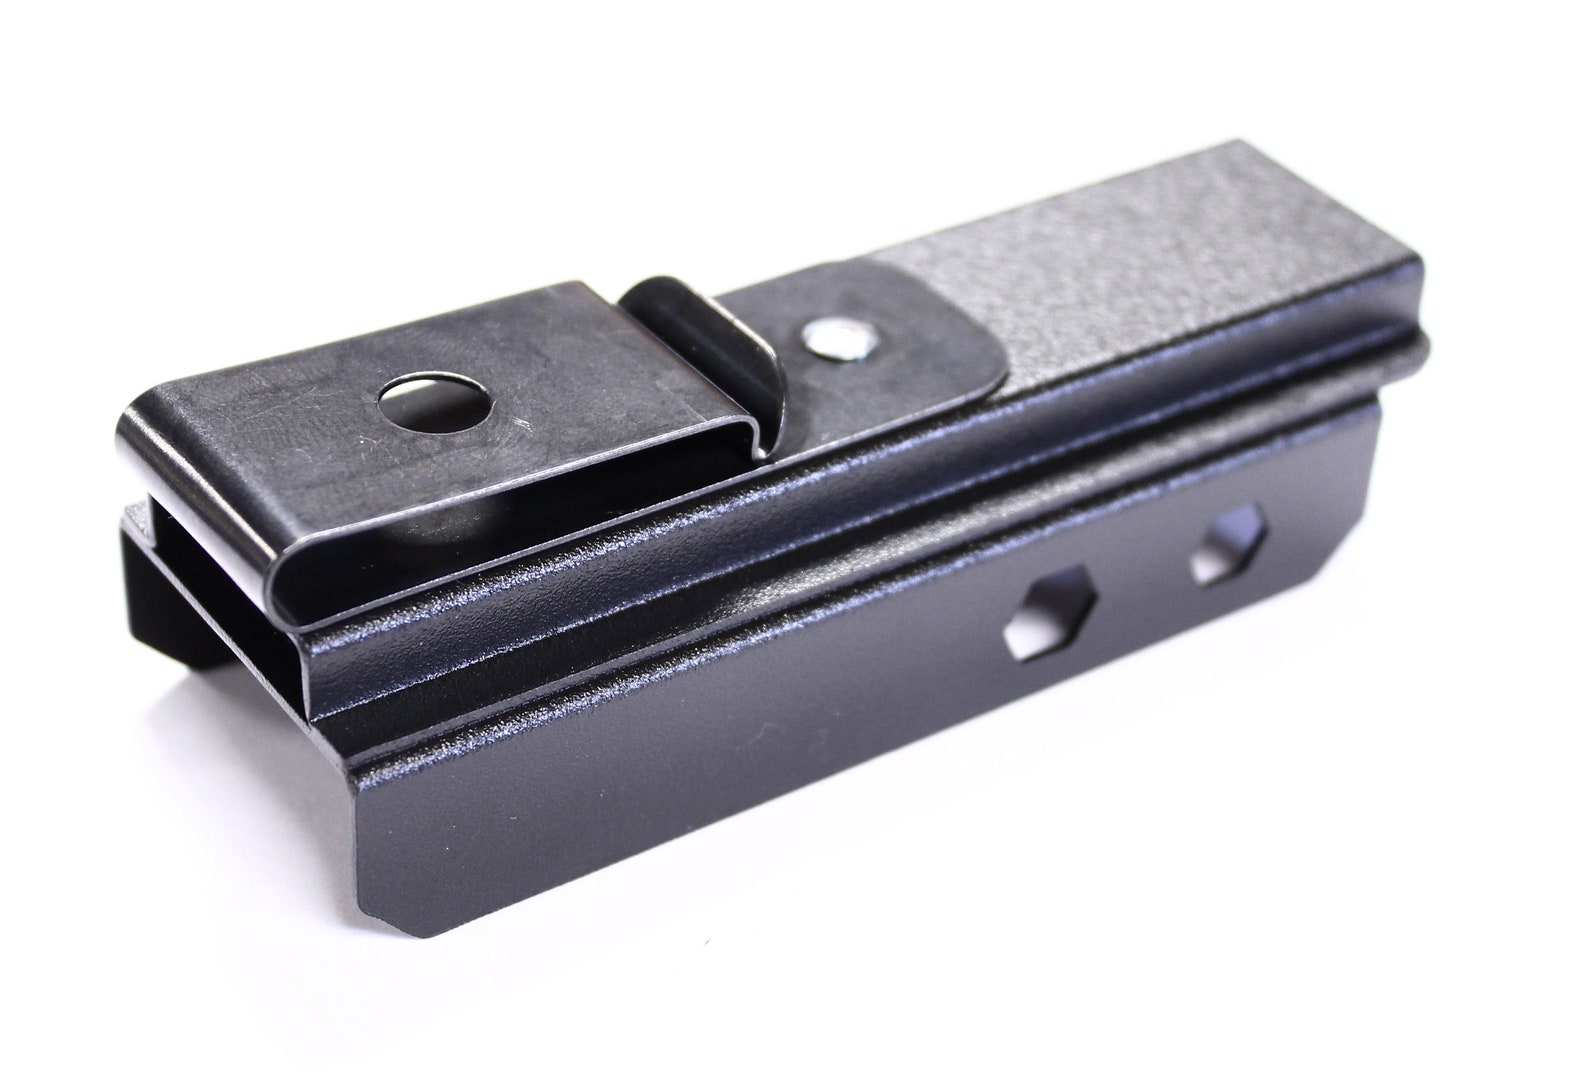 P4 & P2 Magnetic Sheath Compatible With Leatherman Multi-tools - Etsy